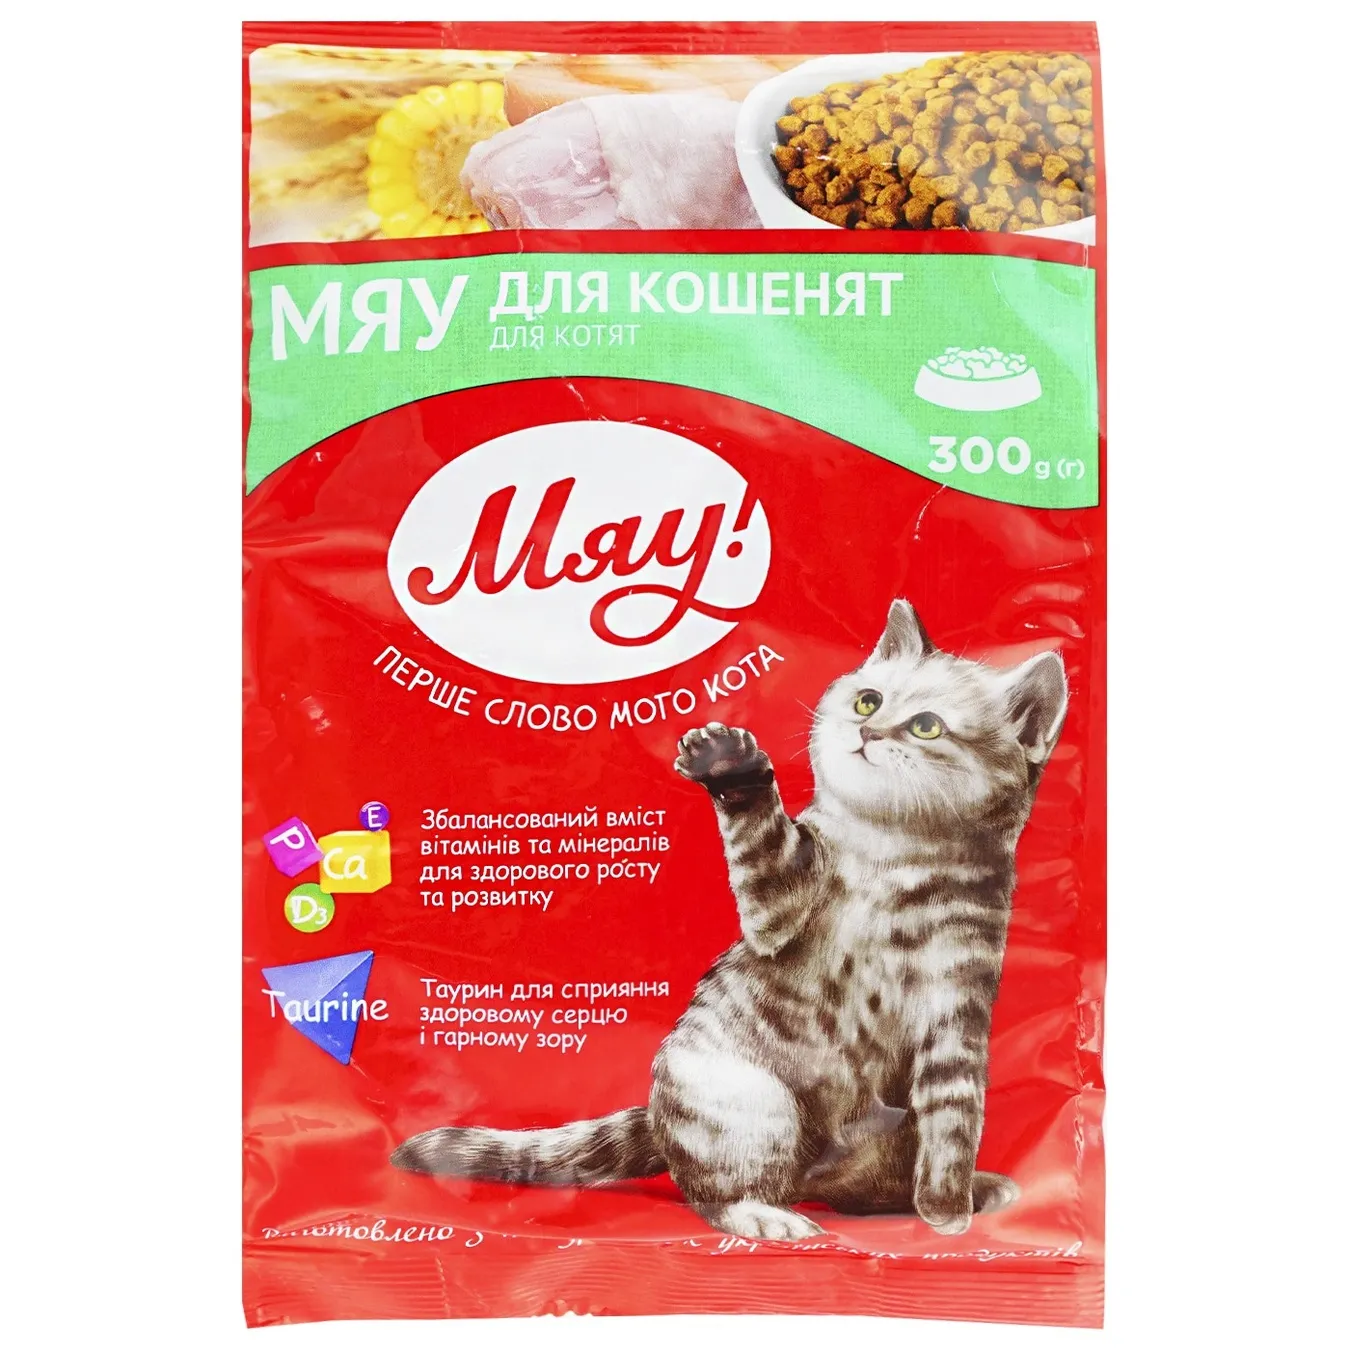 Meow! Dry feed for kittens 300g